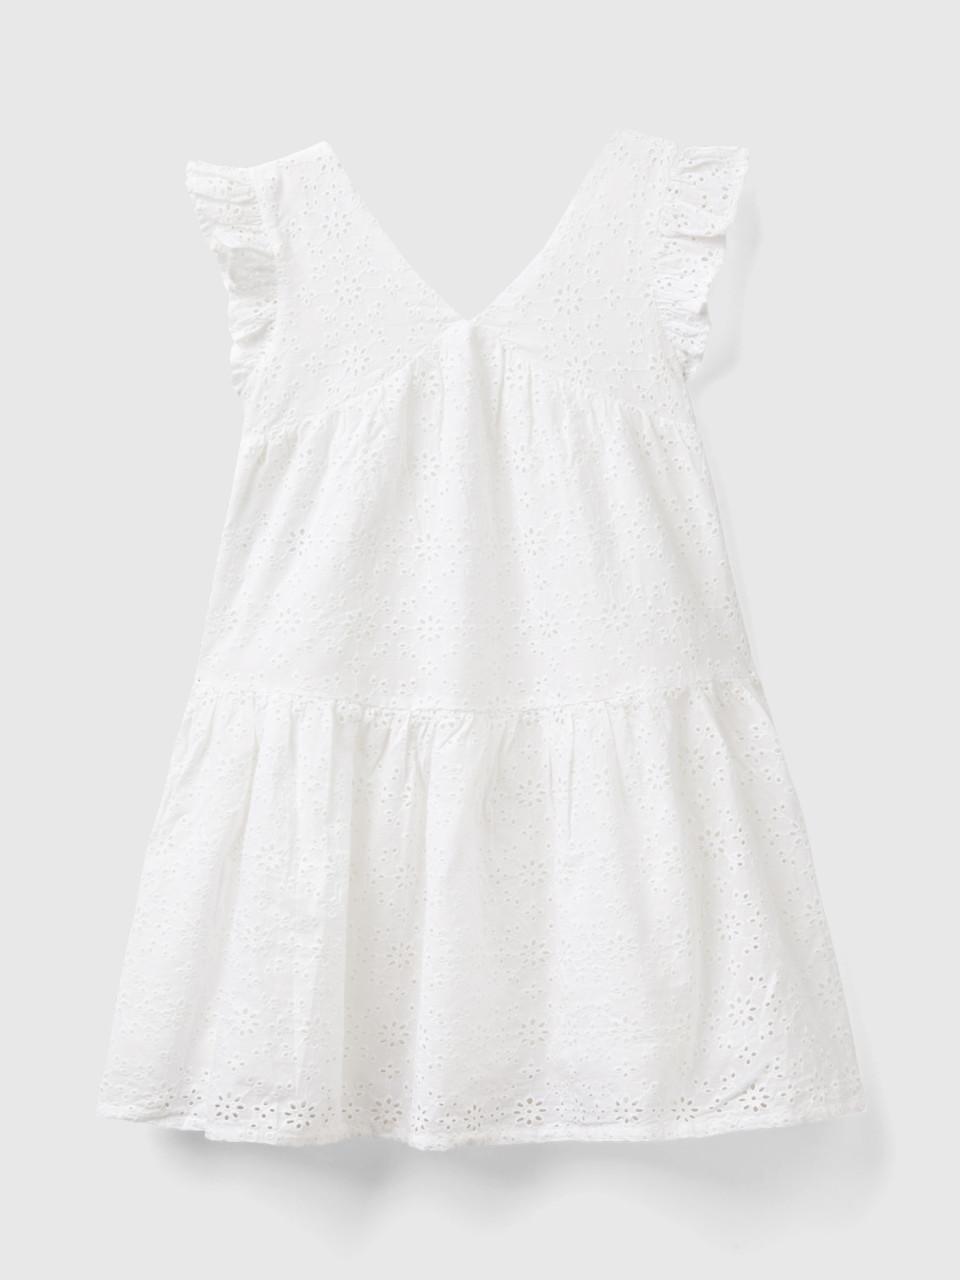 Benetton, Dress With Broderie Anglaise Embroidery, White, Kids